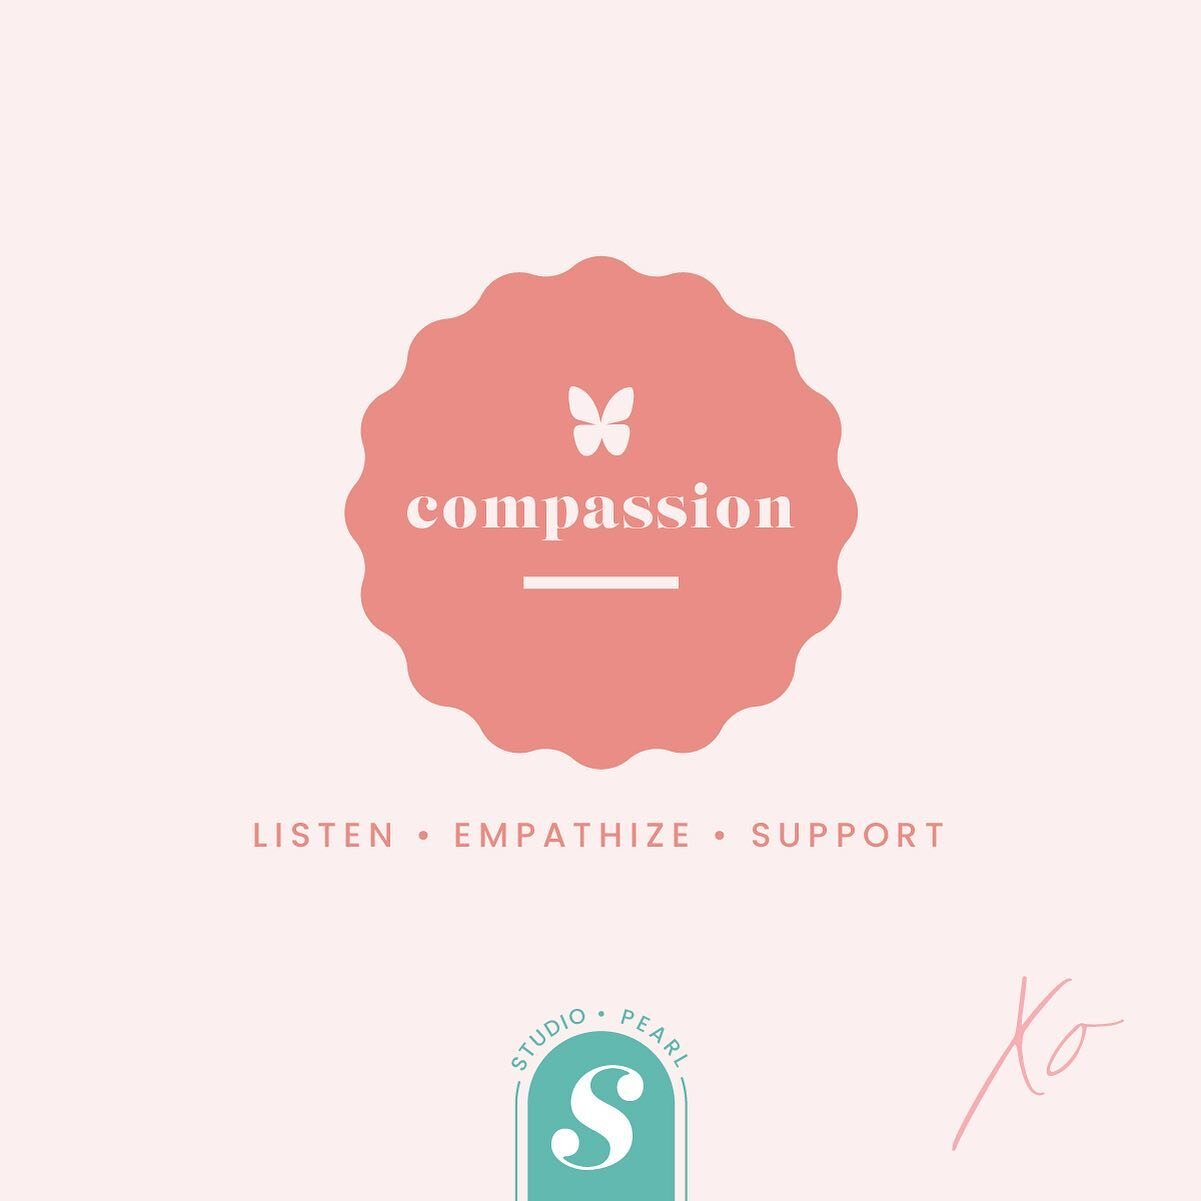 Today's word is compassion.

I was fortunate to spend the morning with some like-minded people in an online seminar discussing the future of workplaces. The key take-away was to have compassion.... We all need to be heard and understood. 

What do yo